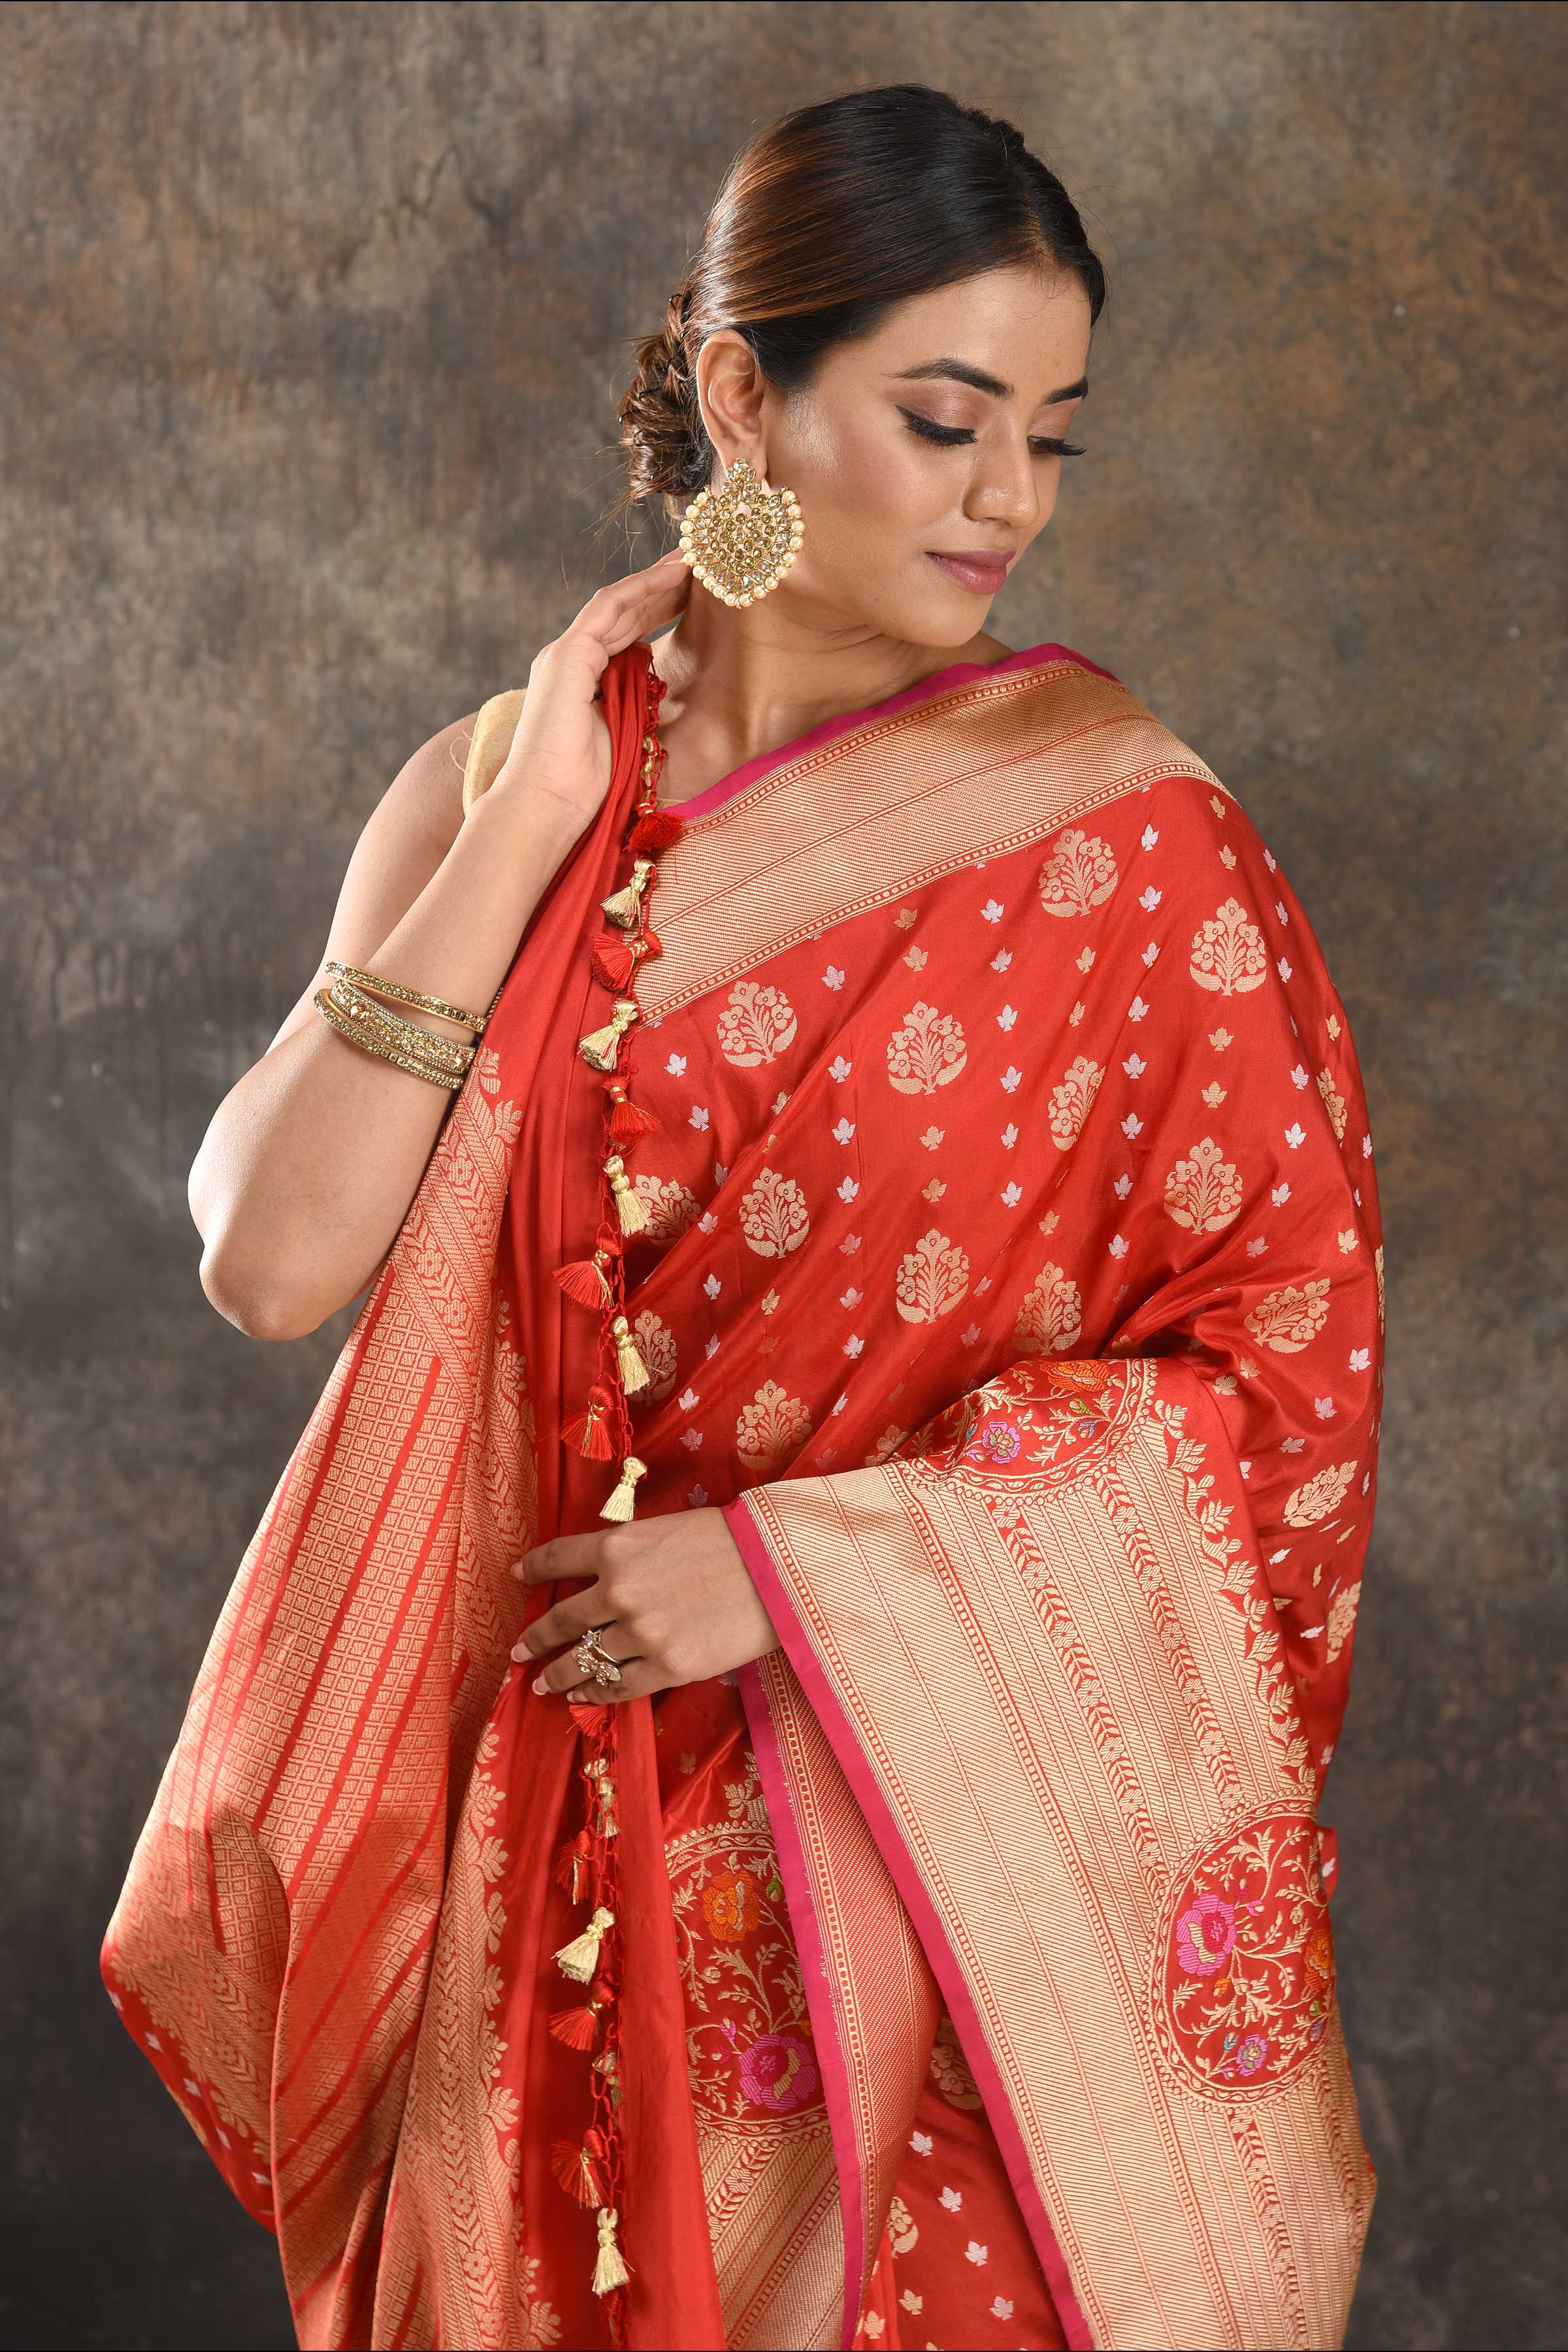 Buy red fancy Katan silk saree online in USA with overall zari buta and border. Be the center of attraction on special occasions in ethnic sarees, designer sarees, embroidered sarees, handwoven sarees, pure silk sarees from Pure Elegance Indian saree store in USA.-closeup